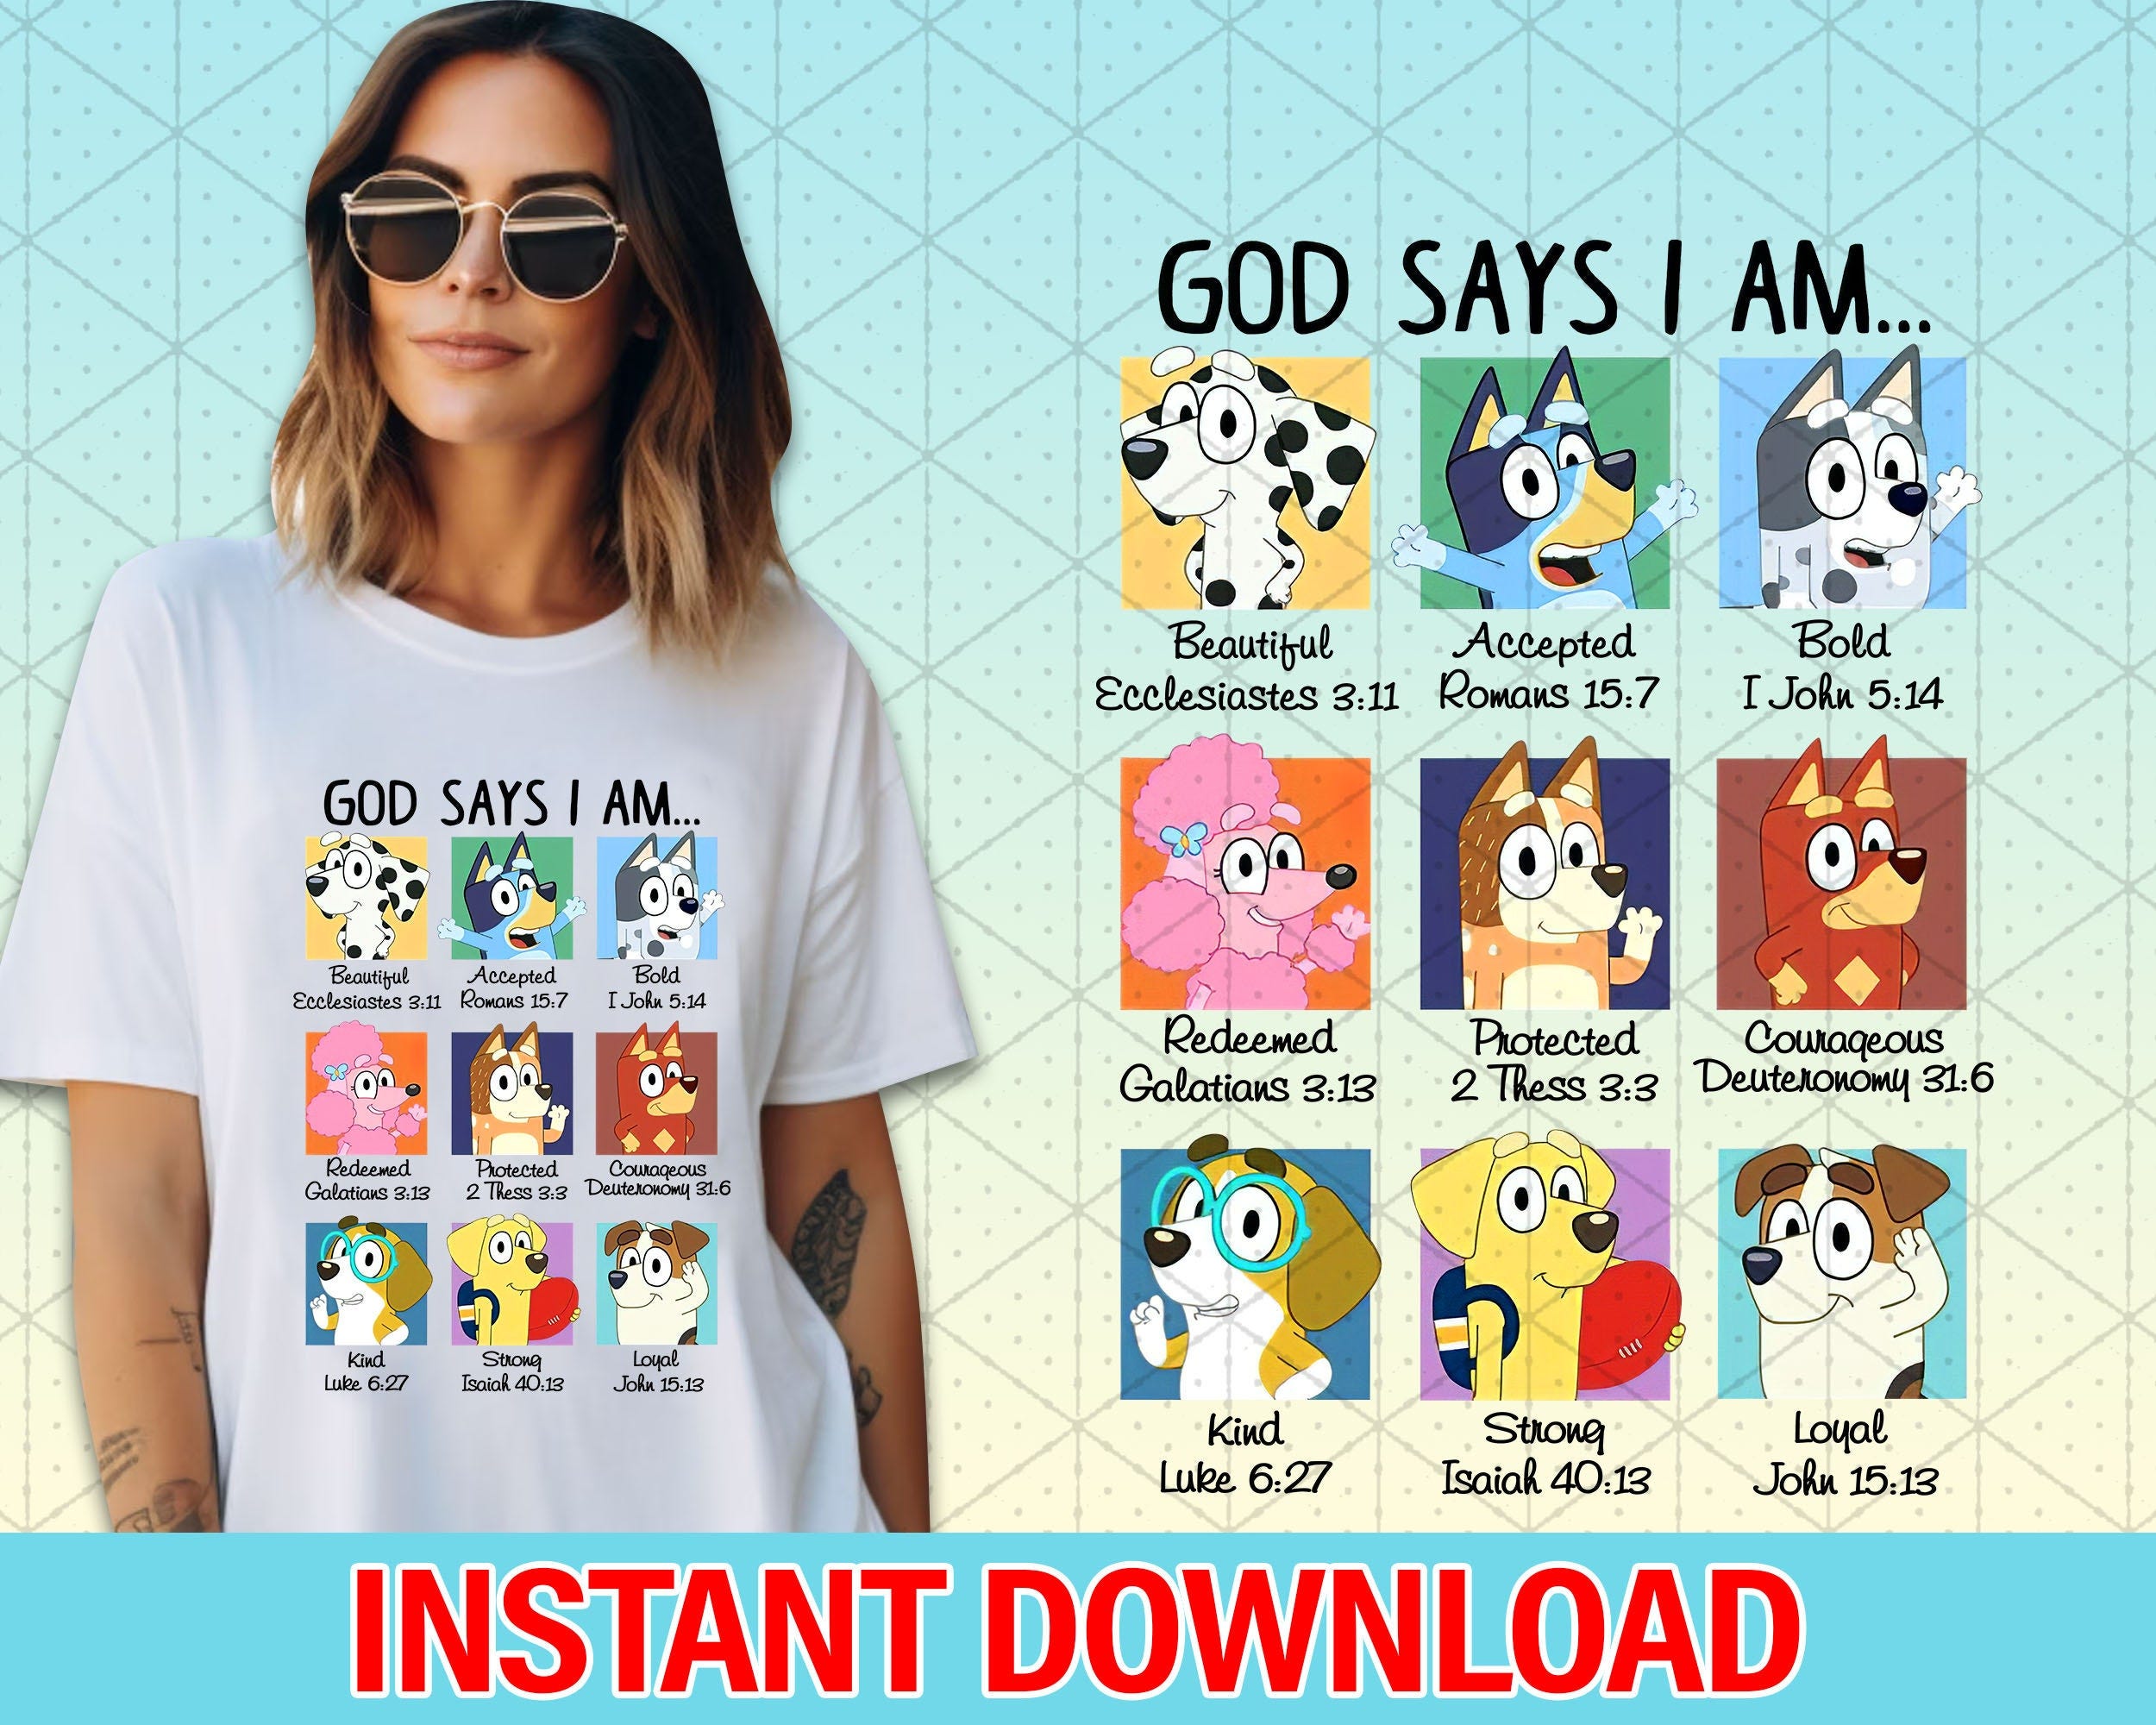 God says I am Bluey PNG, Bluey Family PNG, Bluey Png, Bluey Bingo Png, Bluey Mom Png, Bluey Dad Png, Bluey Friends Png, Bluey PNG